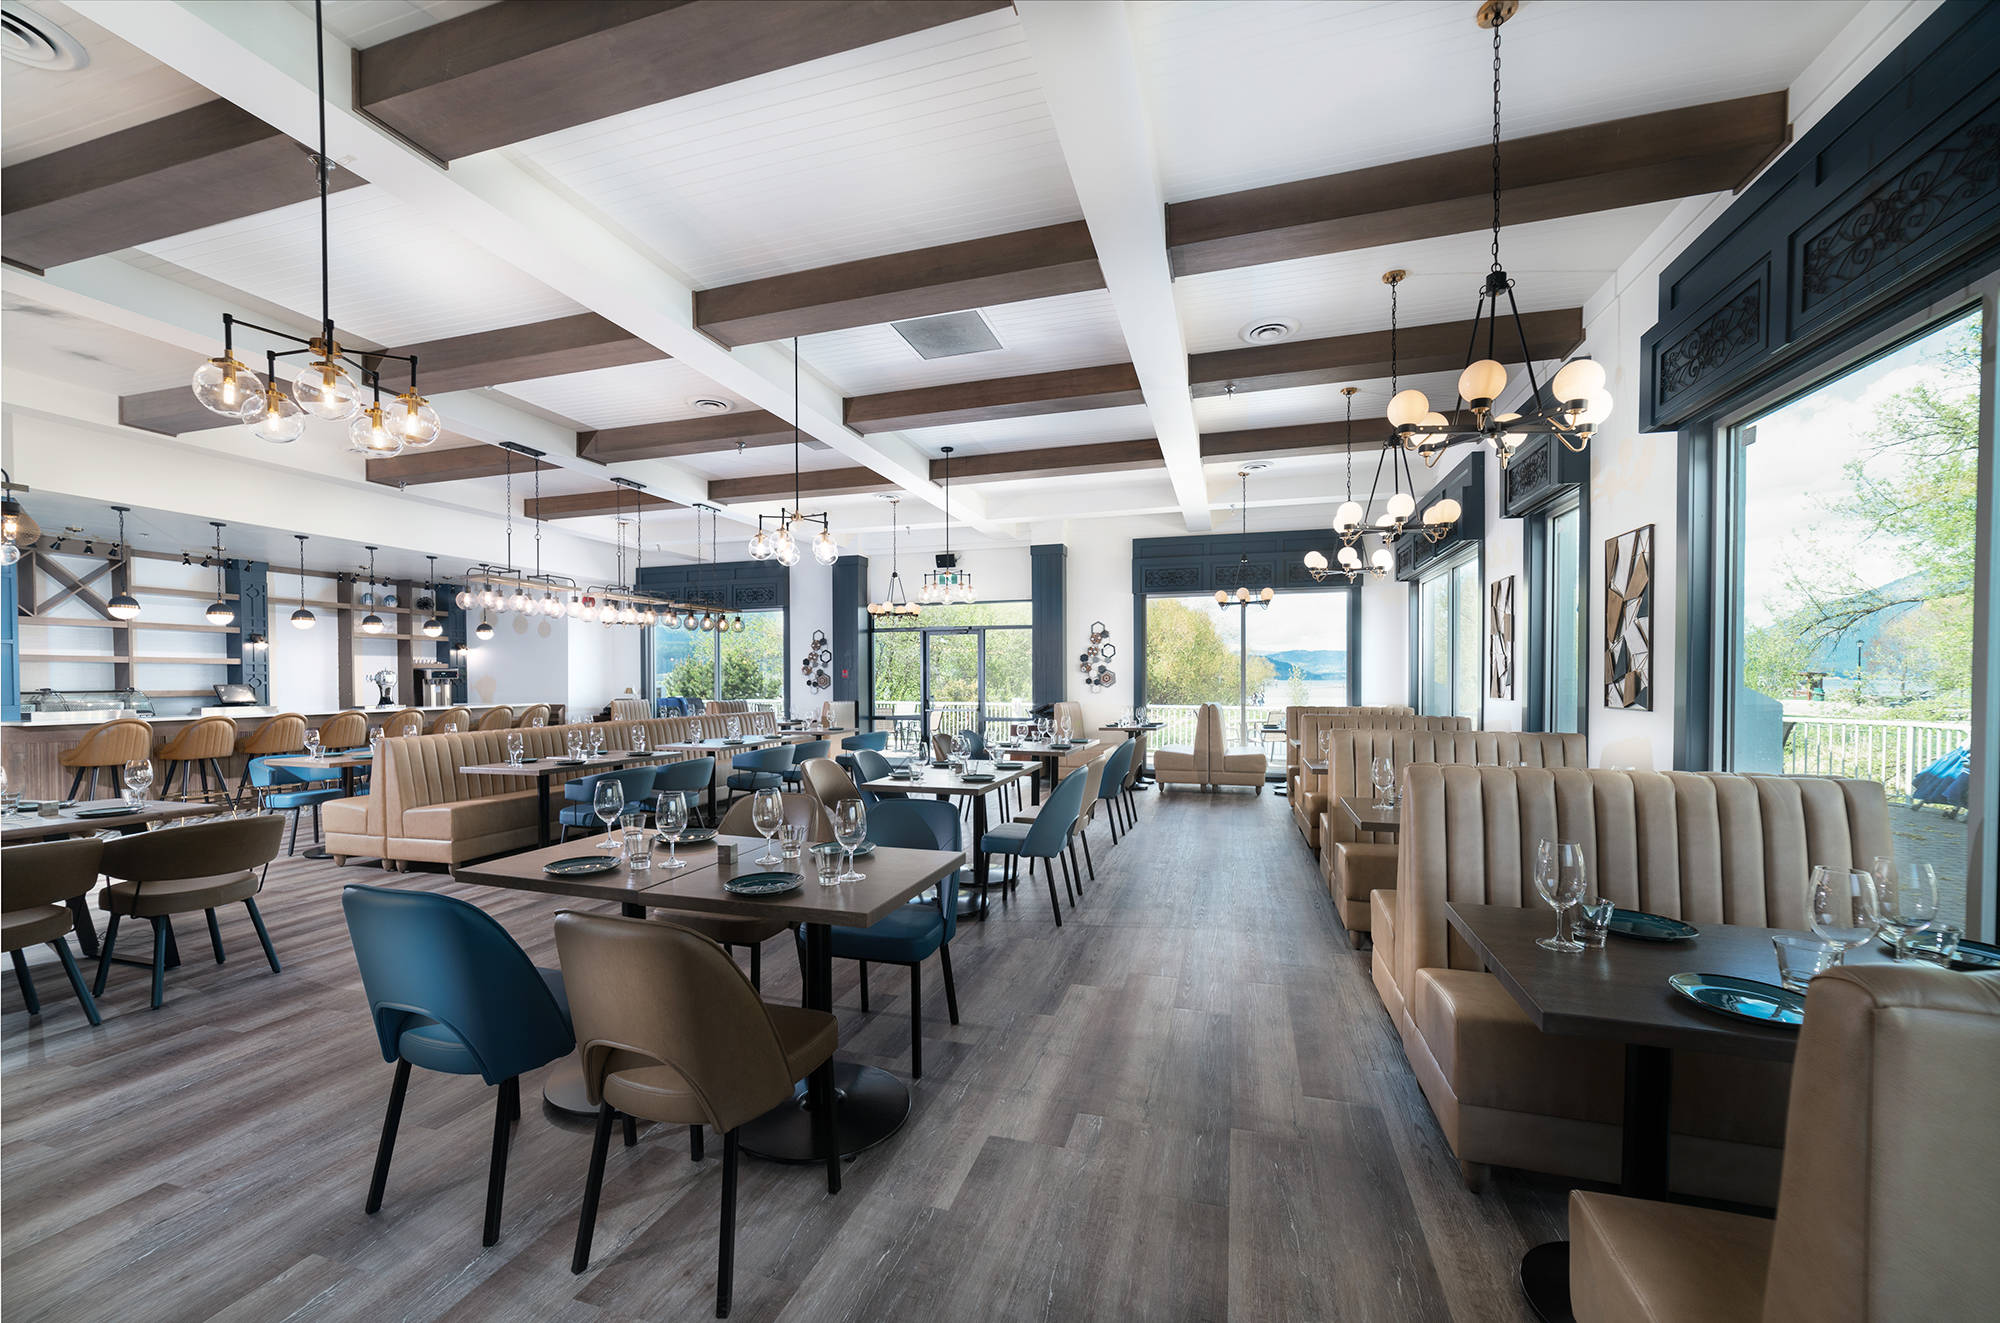 Nineteen05 Kitchen & Raw Bar opened its doors at Salmon Arm’s Prestige Harbourfront Resort on Monday, June 7, 2021. (Contributed)